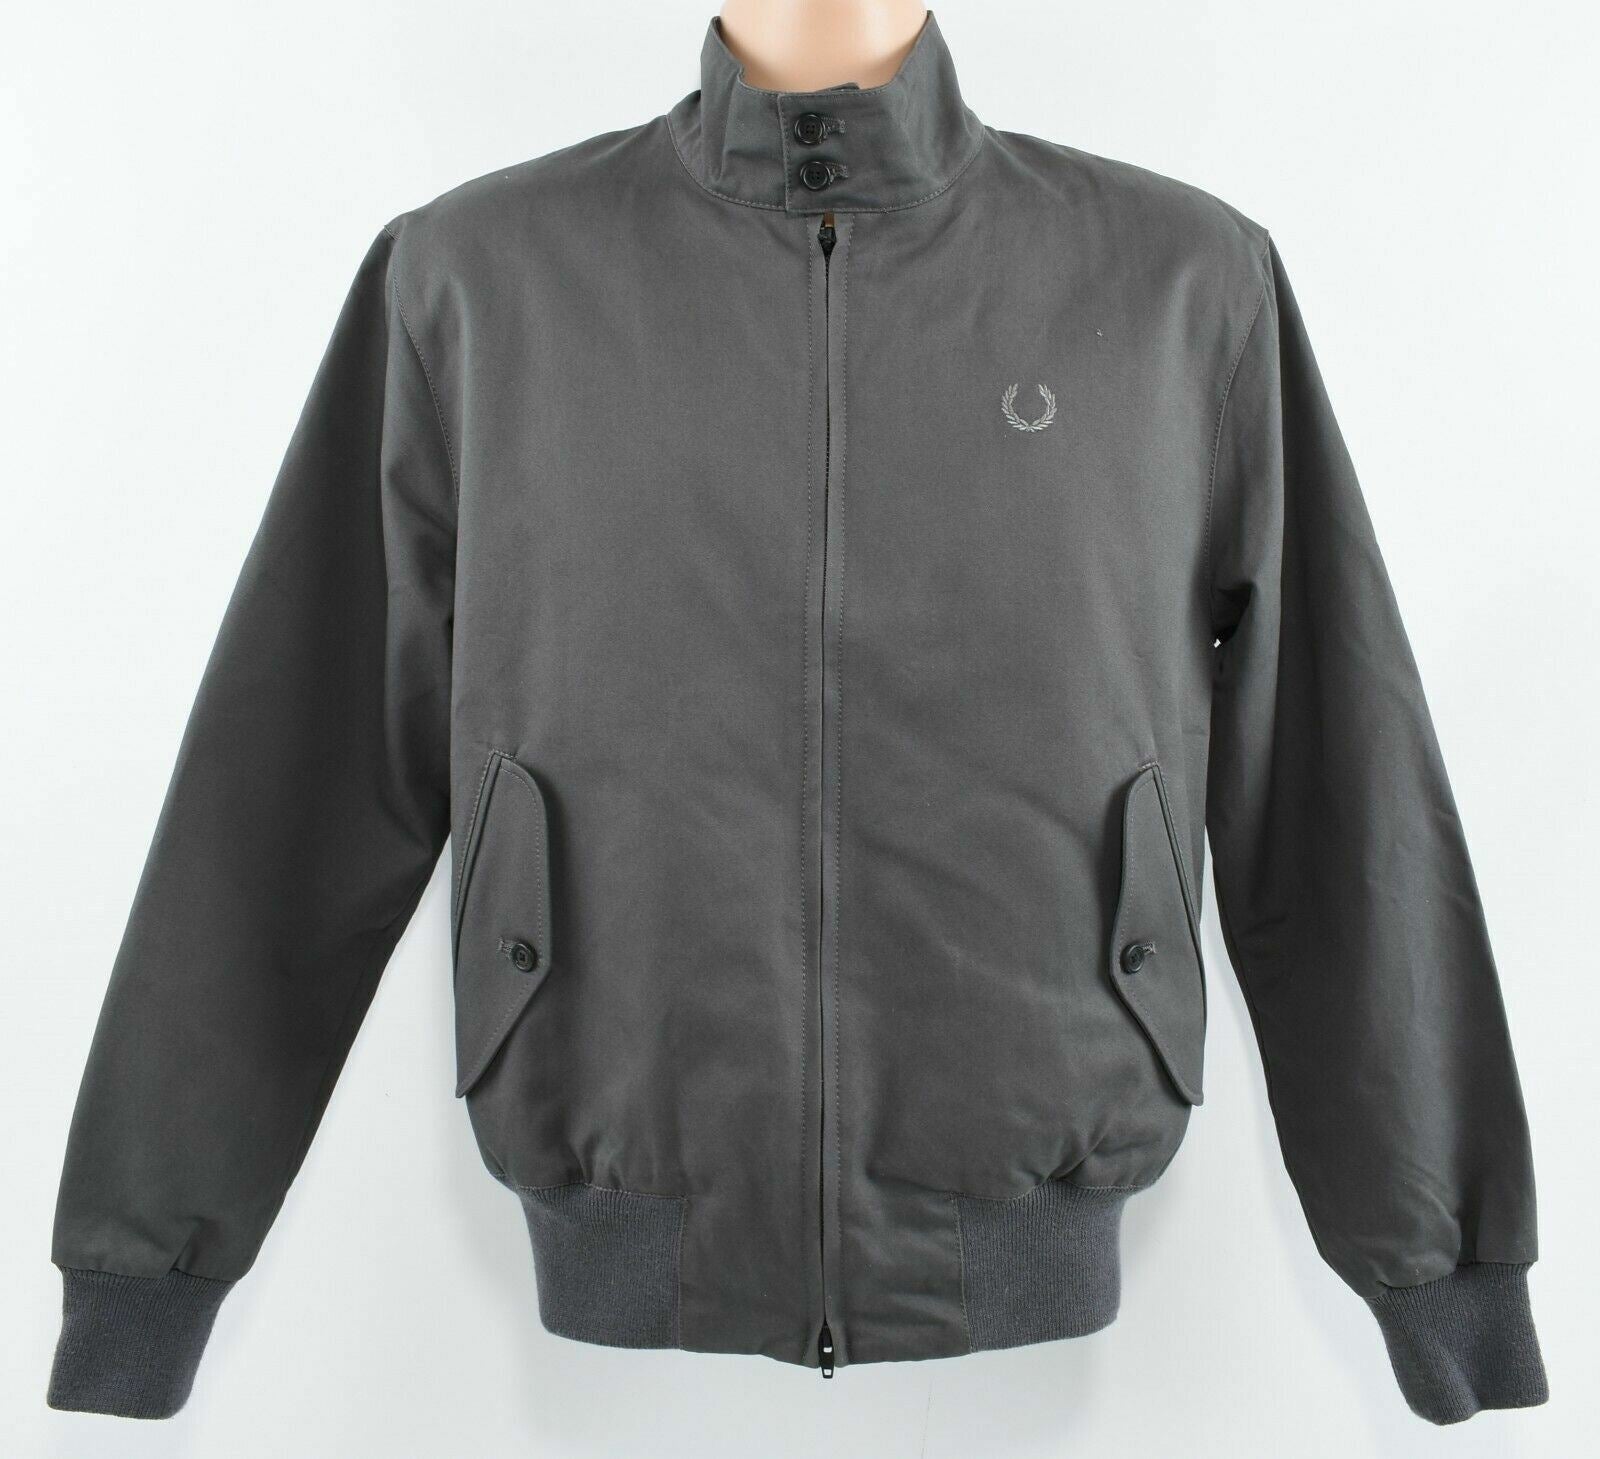 FRED PERRY Men's Cotton Jacket, Dark Olive Green, size XS chest 36"